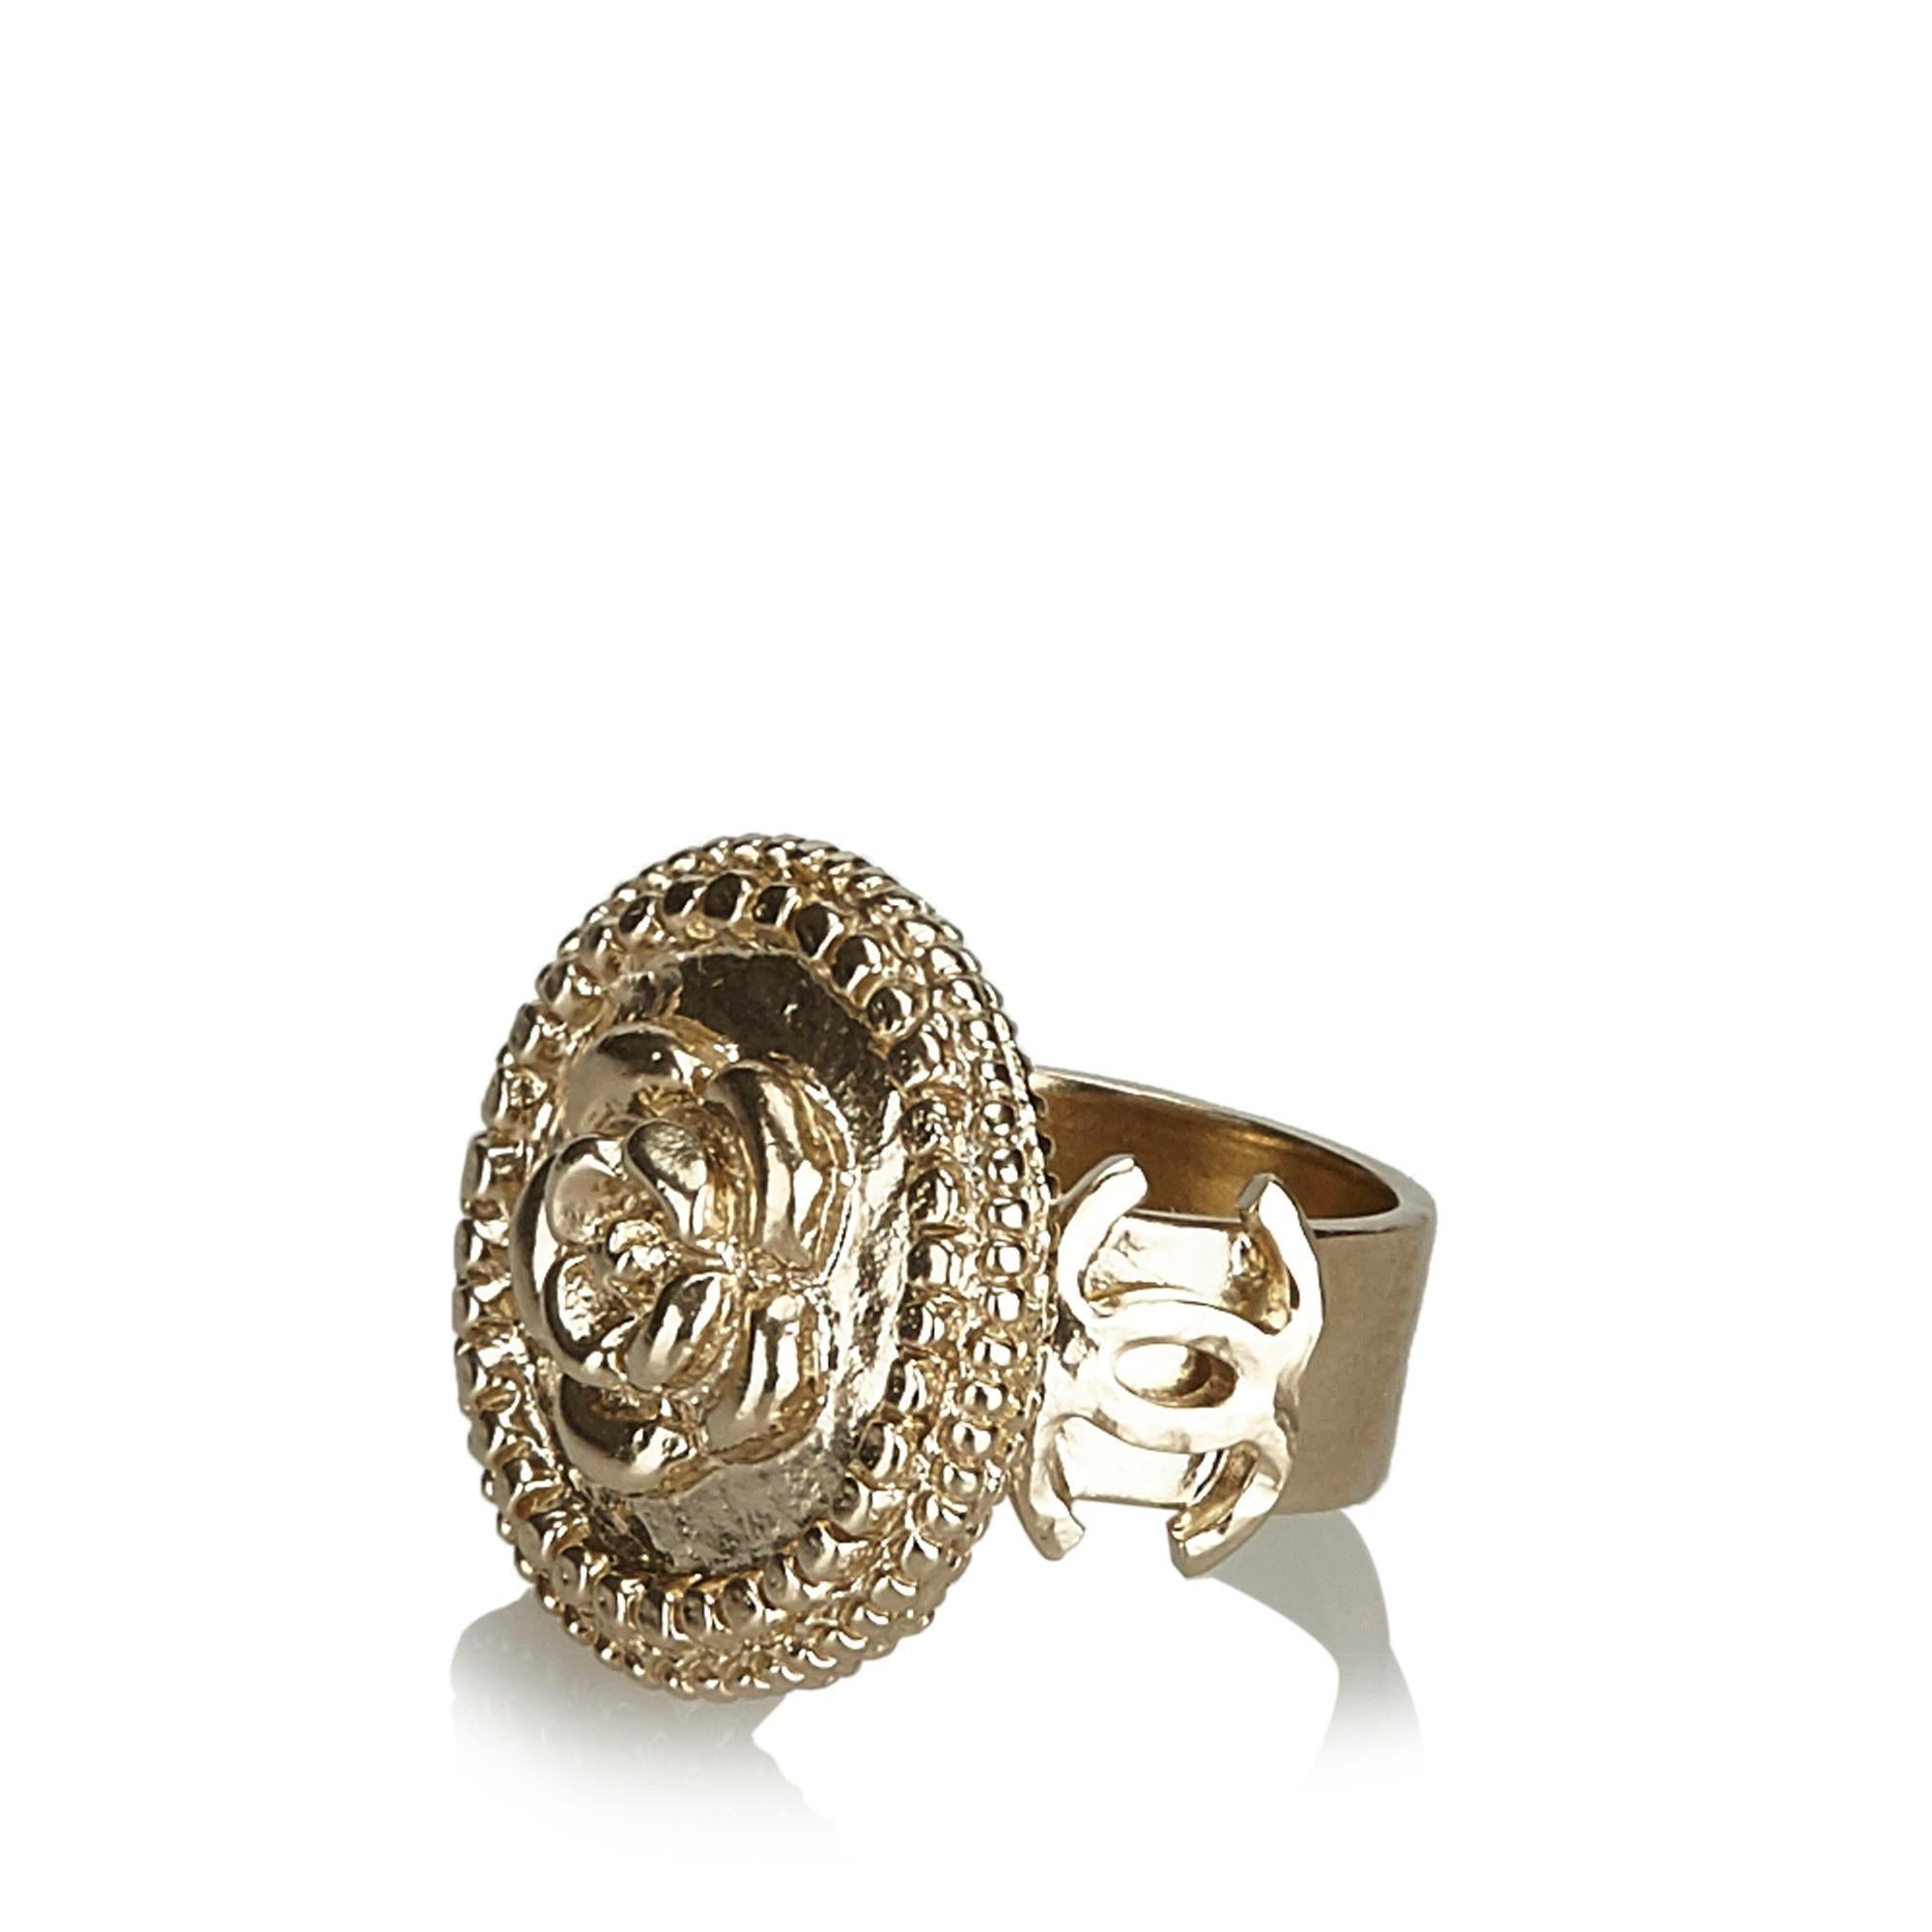 This ring features a gold-tone flower and interlocking Cs, and a gold-tone body. It carries as AB condition rating.

Inclusions: 
Box

Dimensions:
Length: 9.00 cm
Ring Size: 9 cm

Serial Number: B15P
Material: Metal x Others
Country of Origin: